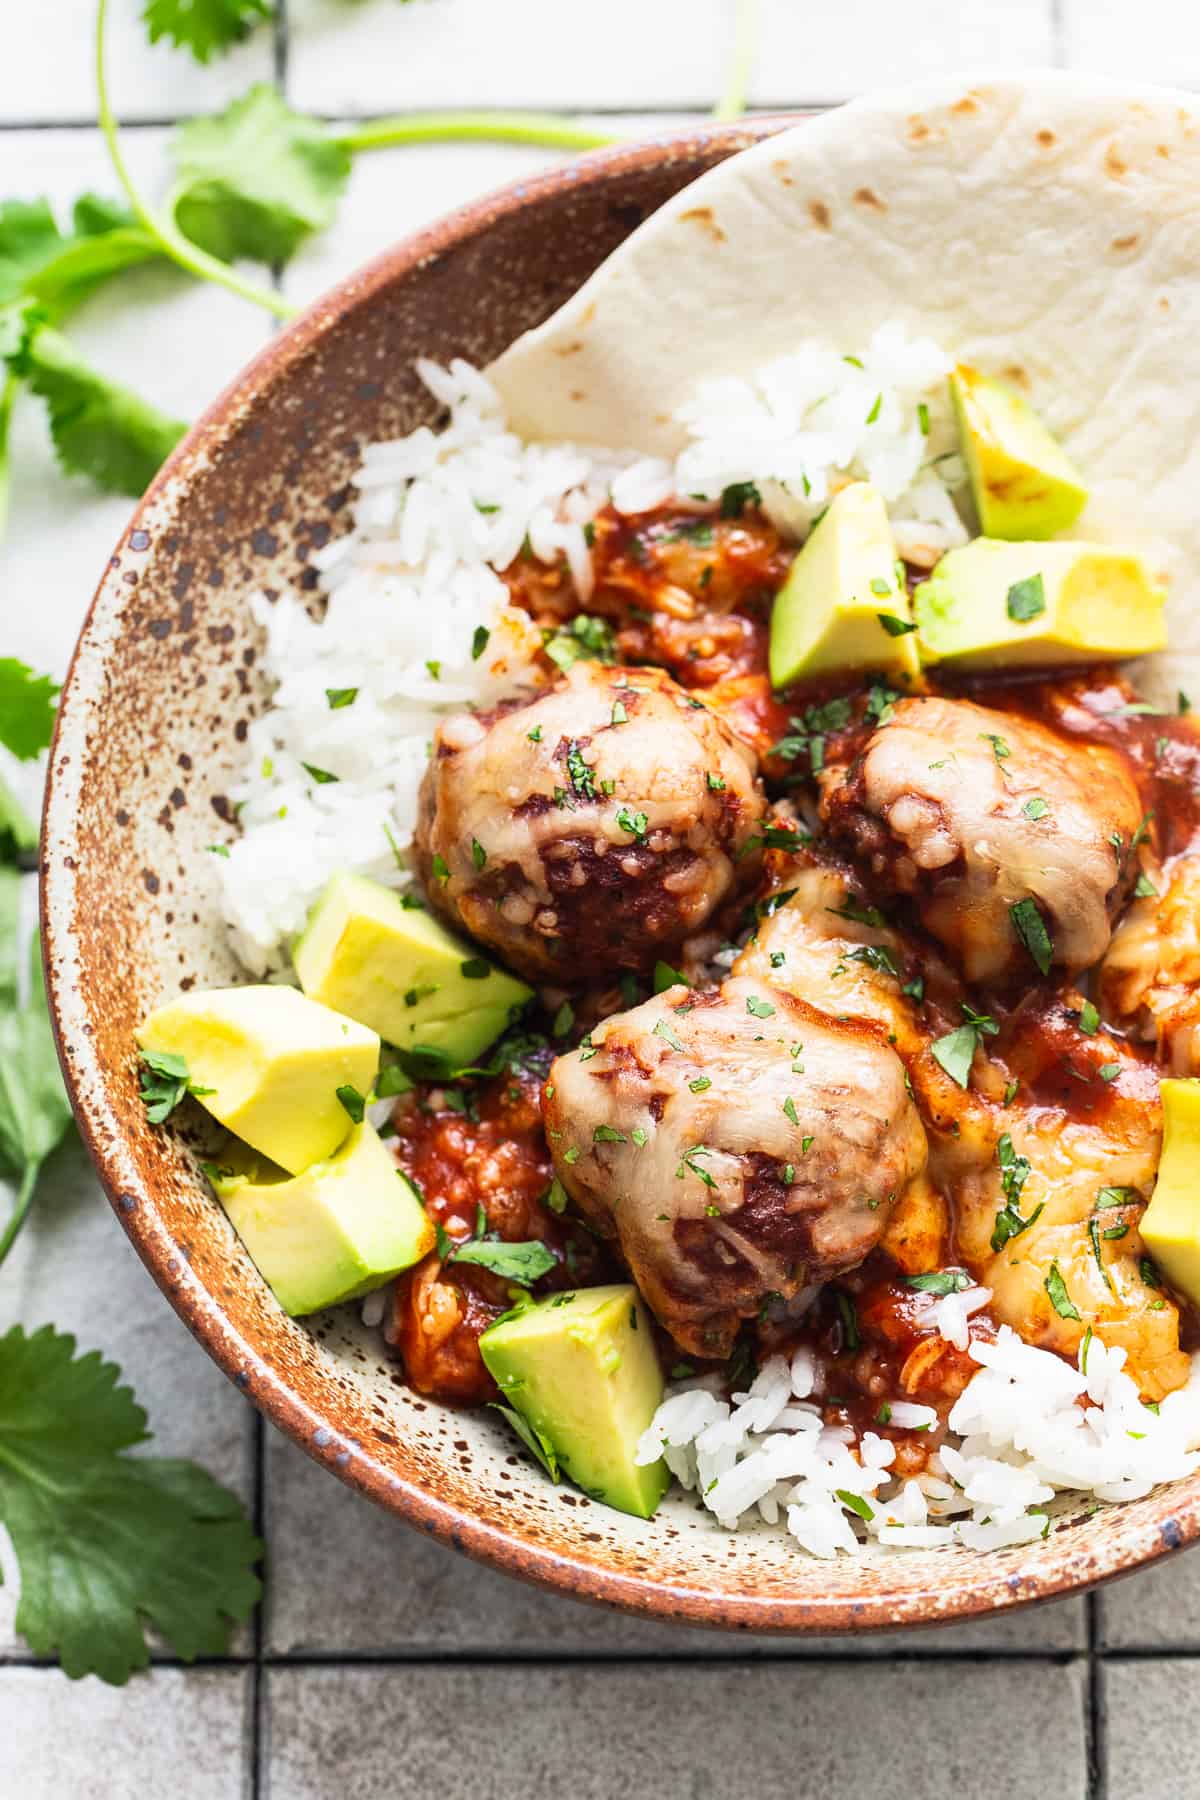 Enchilada meatballs in a bowl with white rice and garnished with diced avocado.